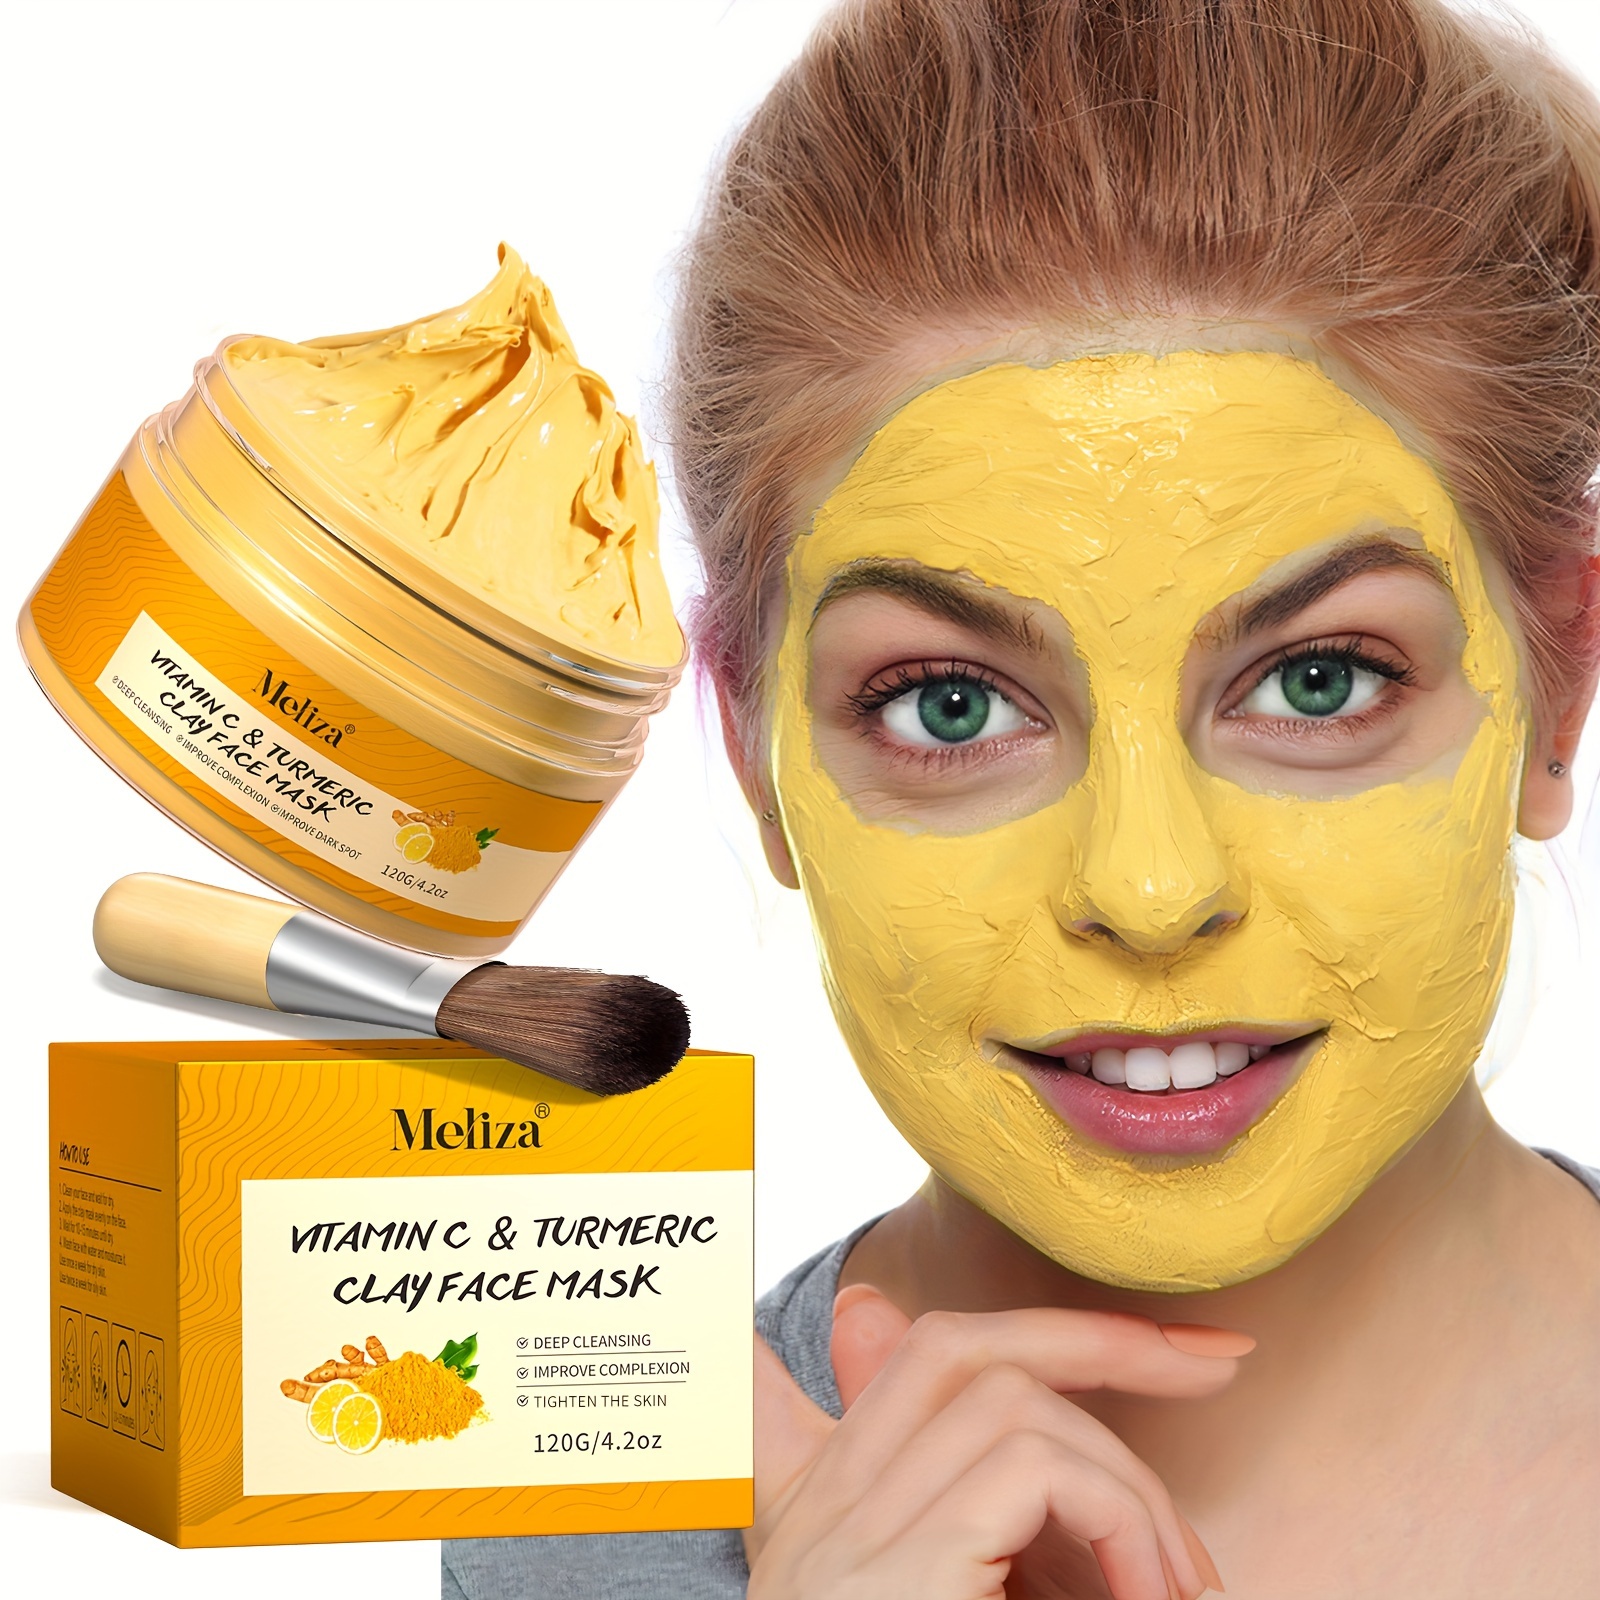 

120g Vitamin C & Turmeric Clay Face Mask, Kaolin &calendula Infused With Honey, Rejuvenating & Exfoliating, Deep Pore Cleansing, Hydrating Facial Skin Care